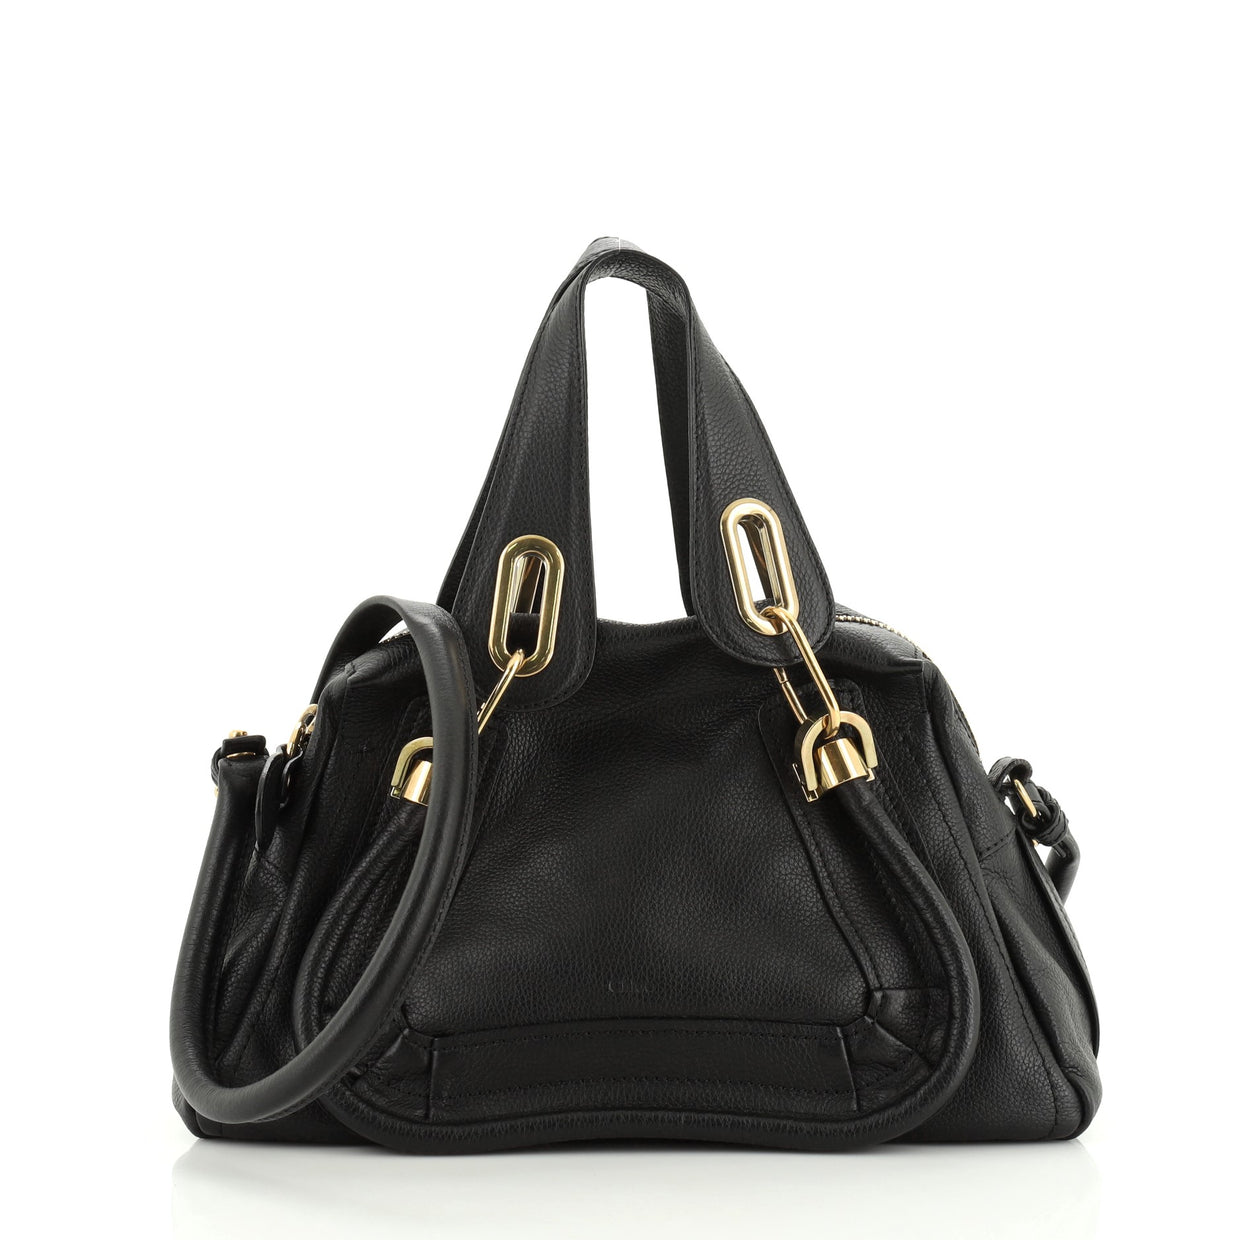 Chloe Paraty Top Handle Bag Leather Small Black 482141